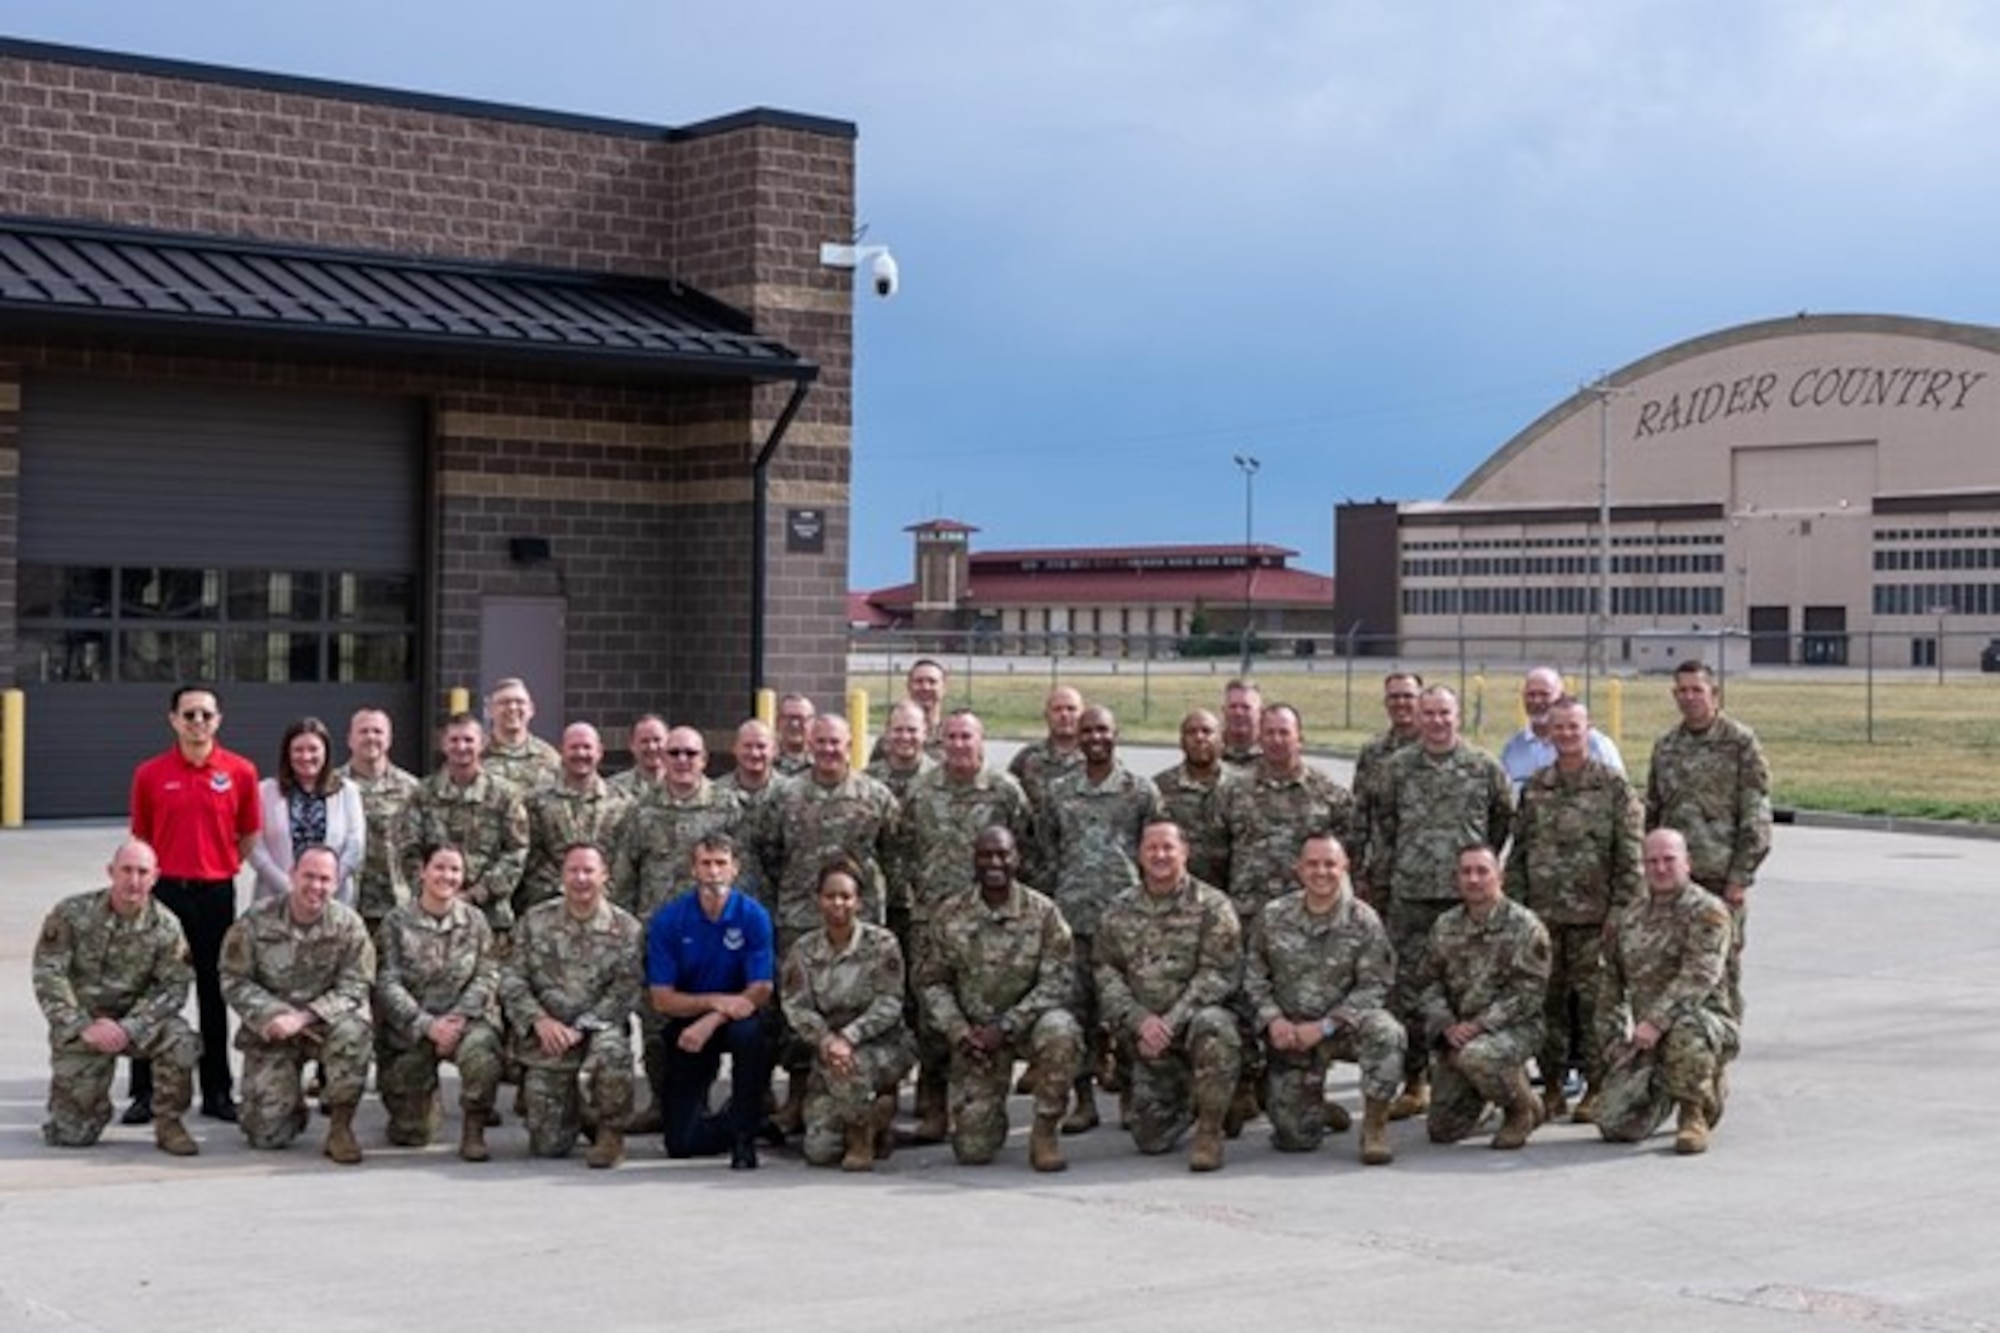 Attendees of the 2022 Air Force Global Strike Command (AFGSC) Maintenance Group Commander and Senior Enlisted Leader (SEL) Summit gather for a group photo on Ellsworth AFB, S.D., Aug. 24, 2022. The summit created discussion between maintenance commanders and SELs that promoted modernization and preparing for the future. (U.S. Air Force photo by Senior Airman Austin McIntosh)